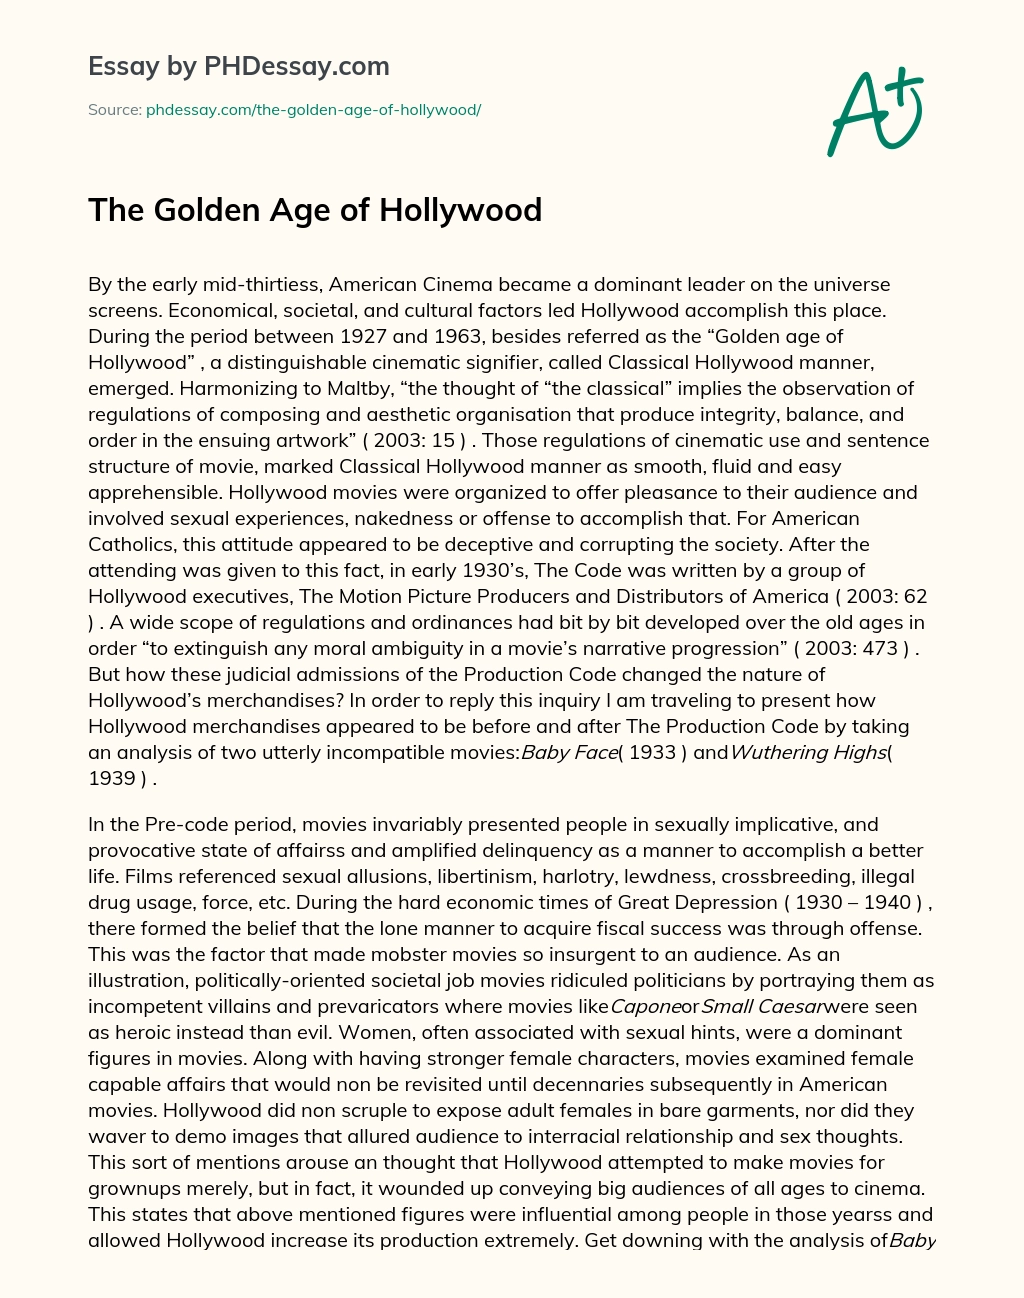 The Golden Age of Hollywood essay